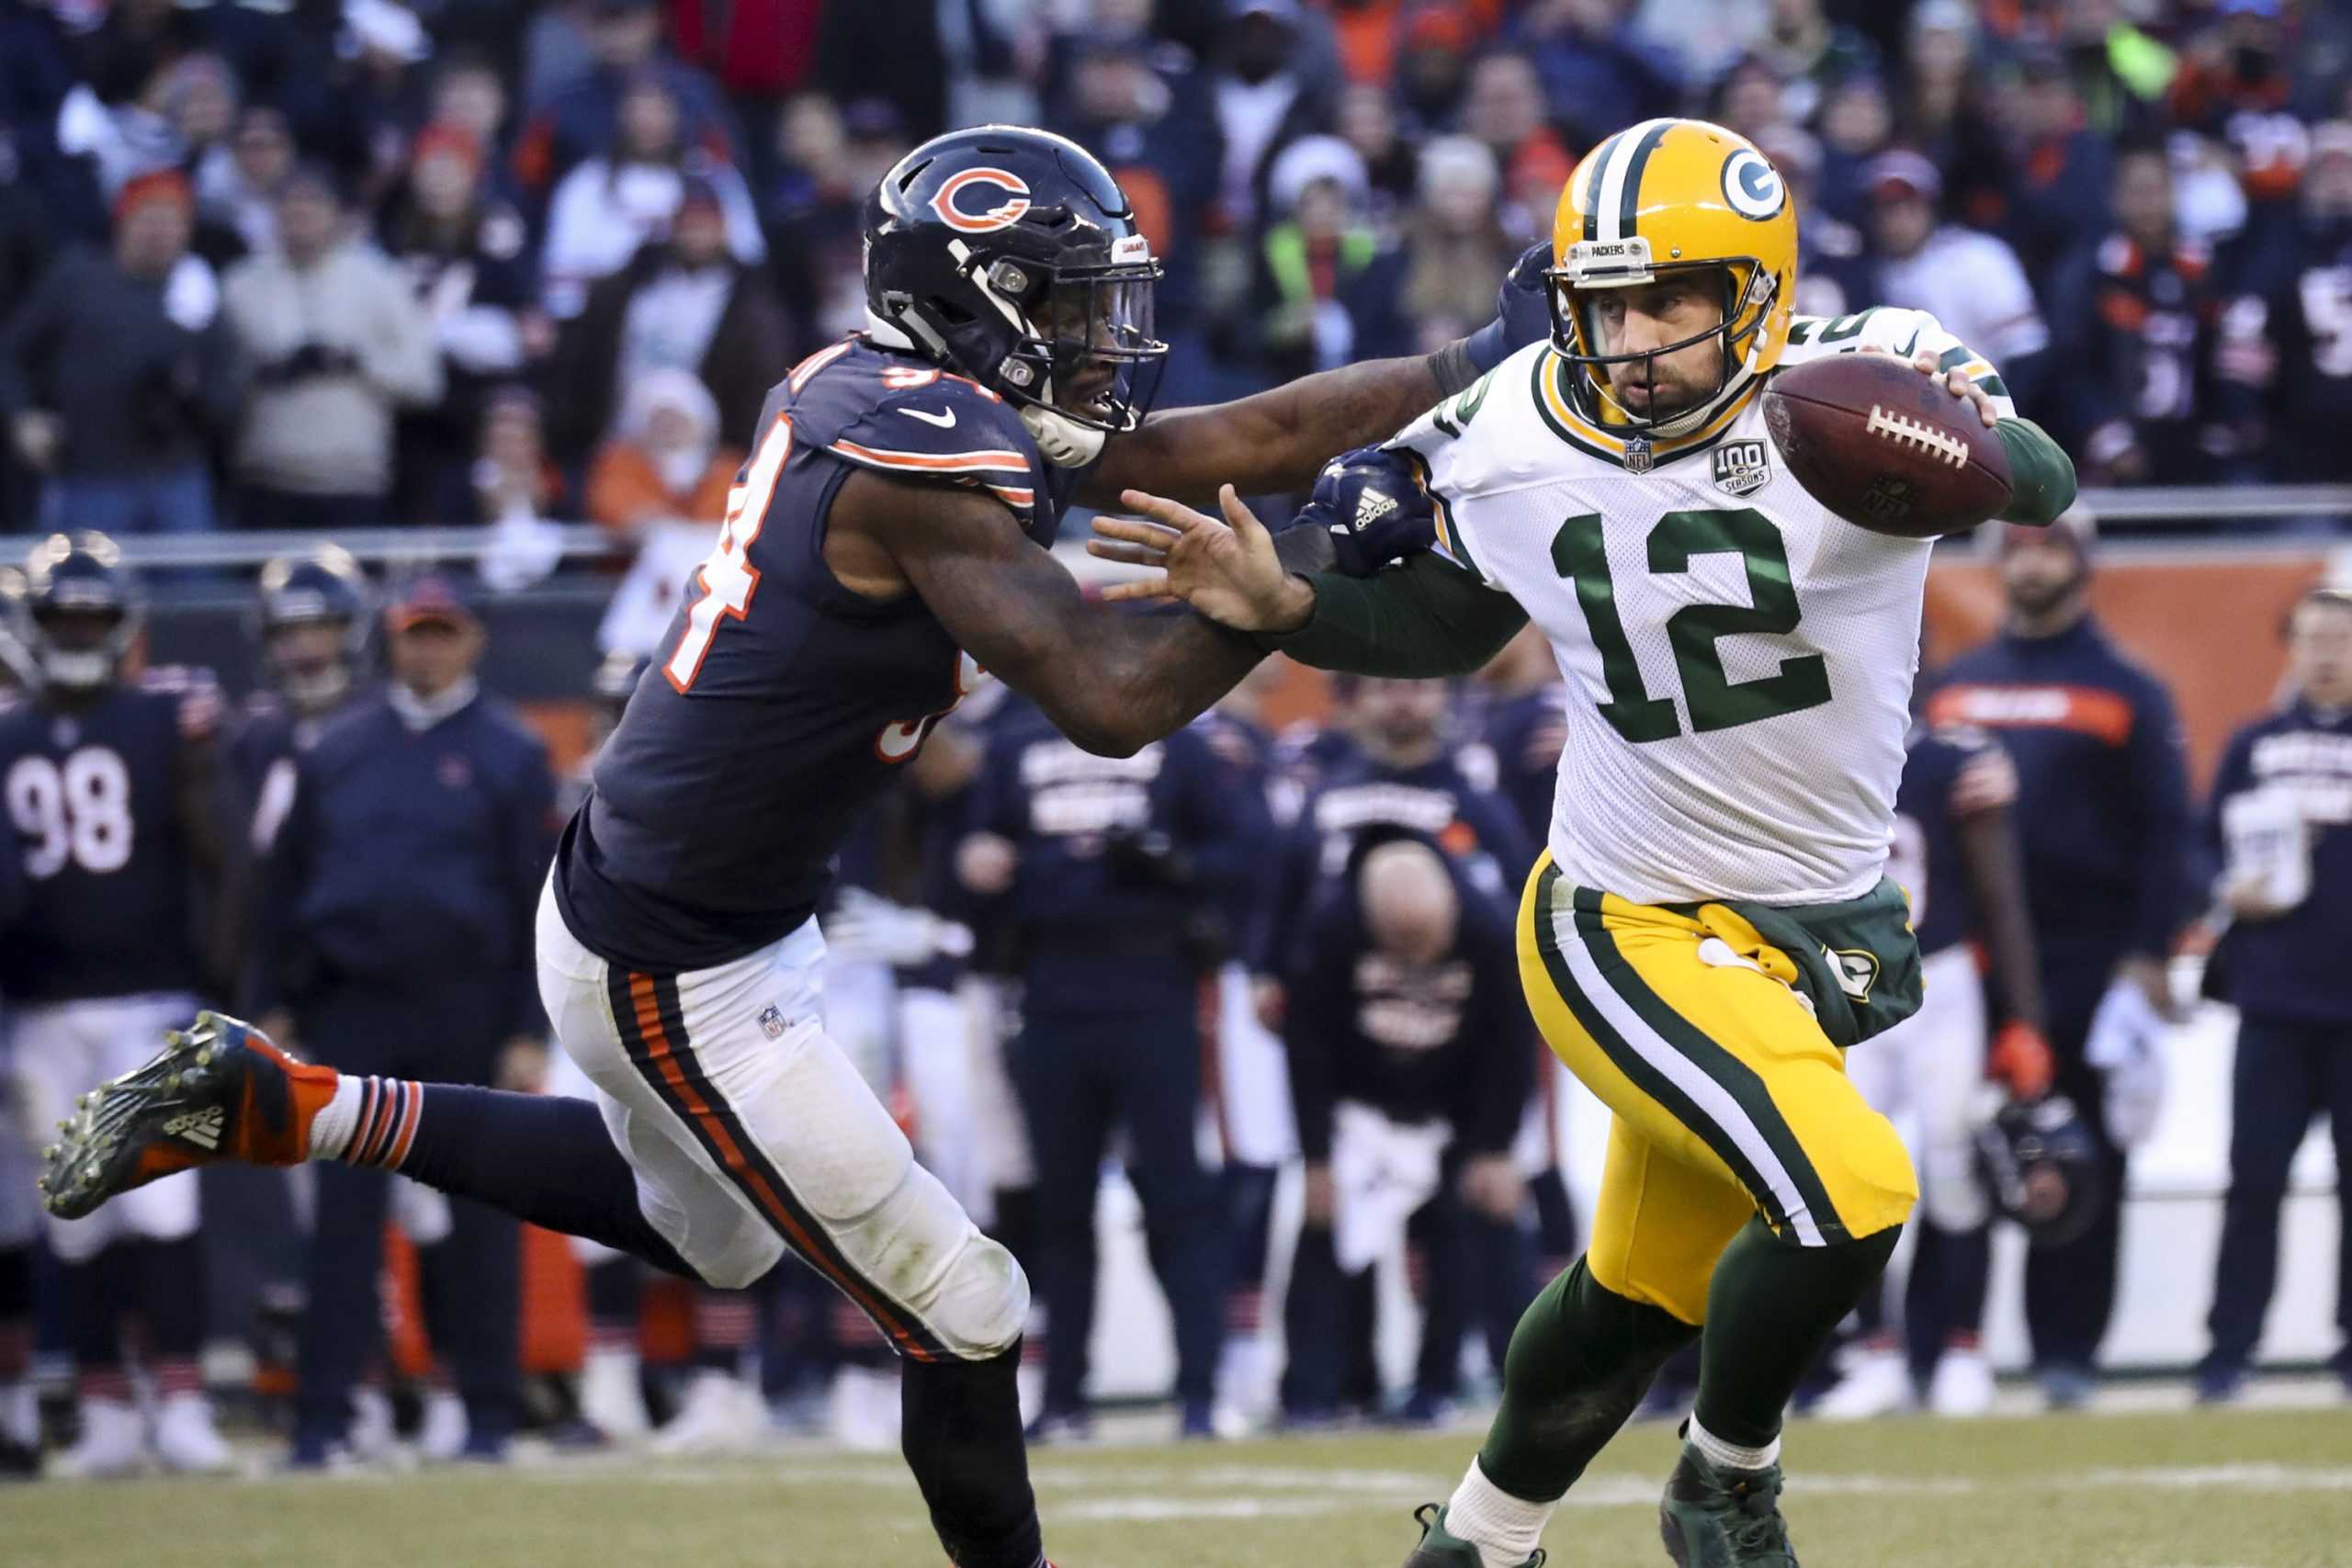 Chicago Bears outside linebacker Leonard Floyd (94) sacks Green Bay Packers quarterback Aaron Rodgers (12) near the end of the second half on Sunday, Dec. 16, 2018 at Soldier Field in Chicago. (Armando L. Sanchez/Chicago Tribune/TNS)